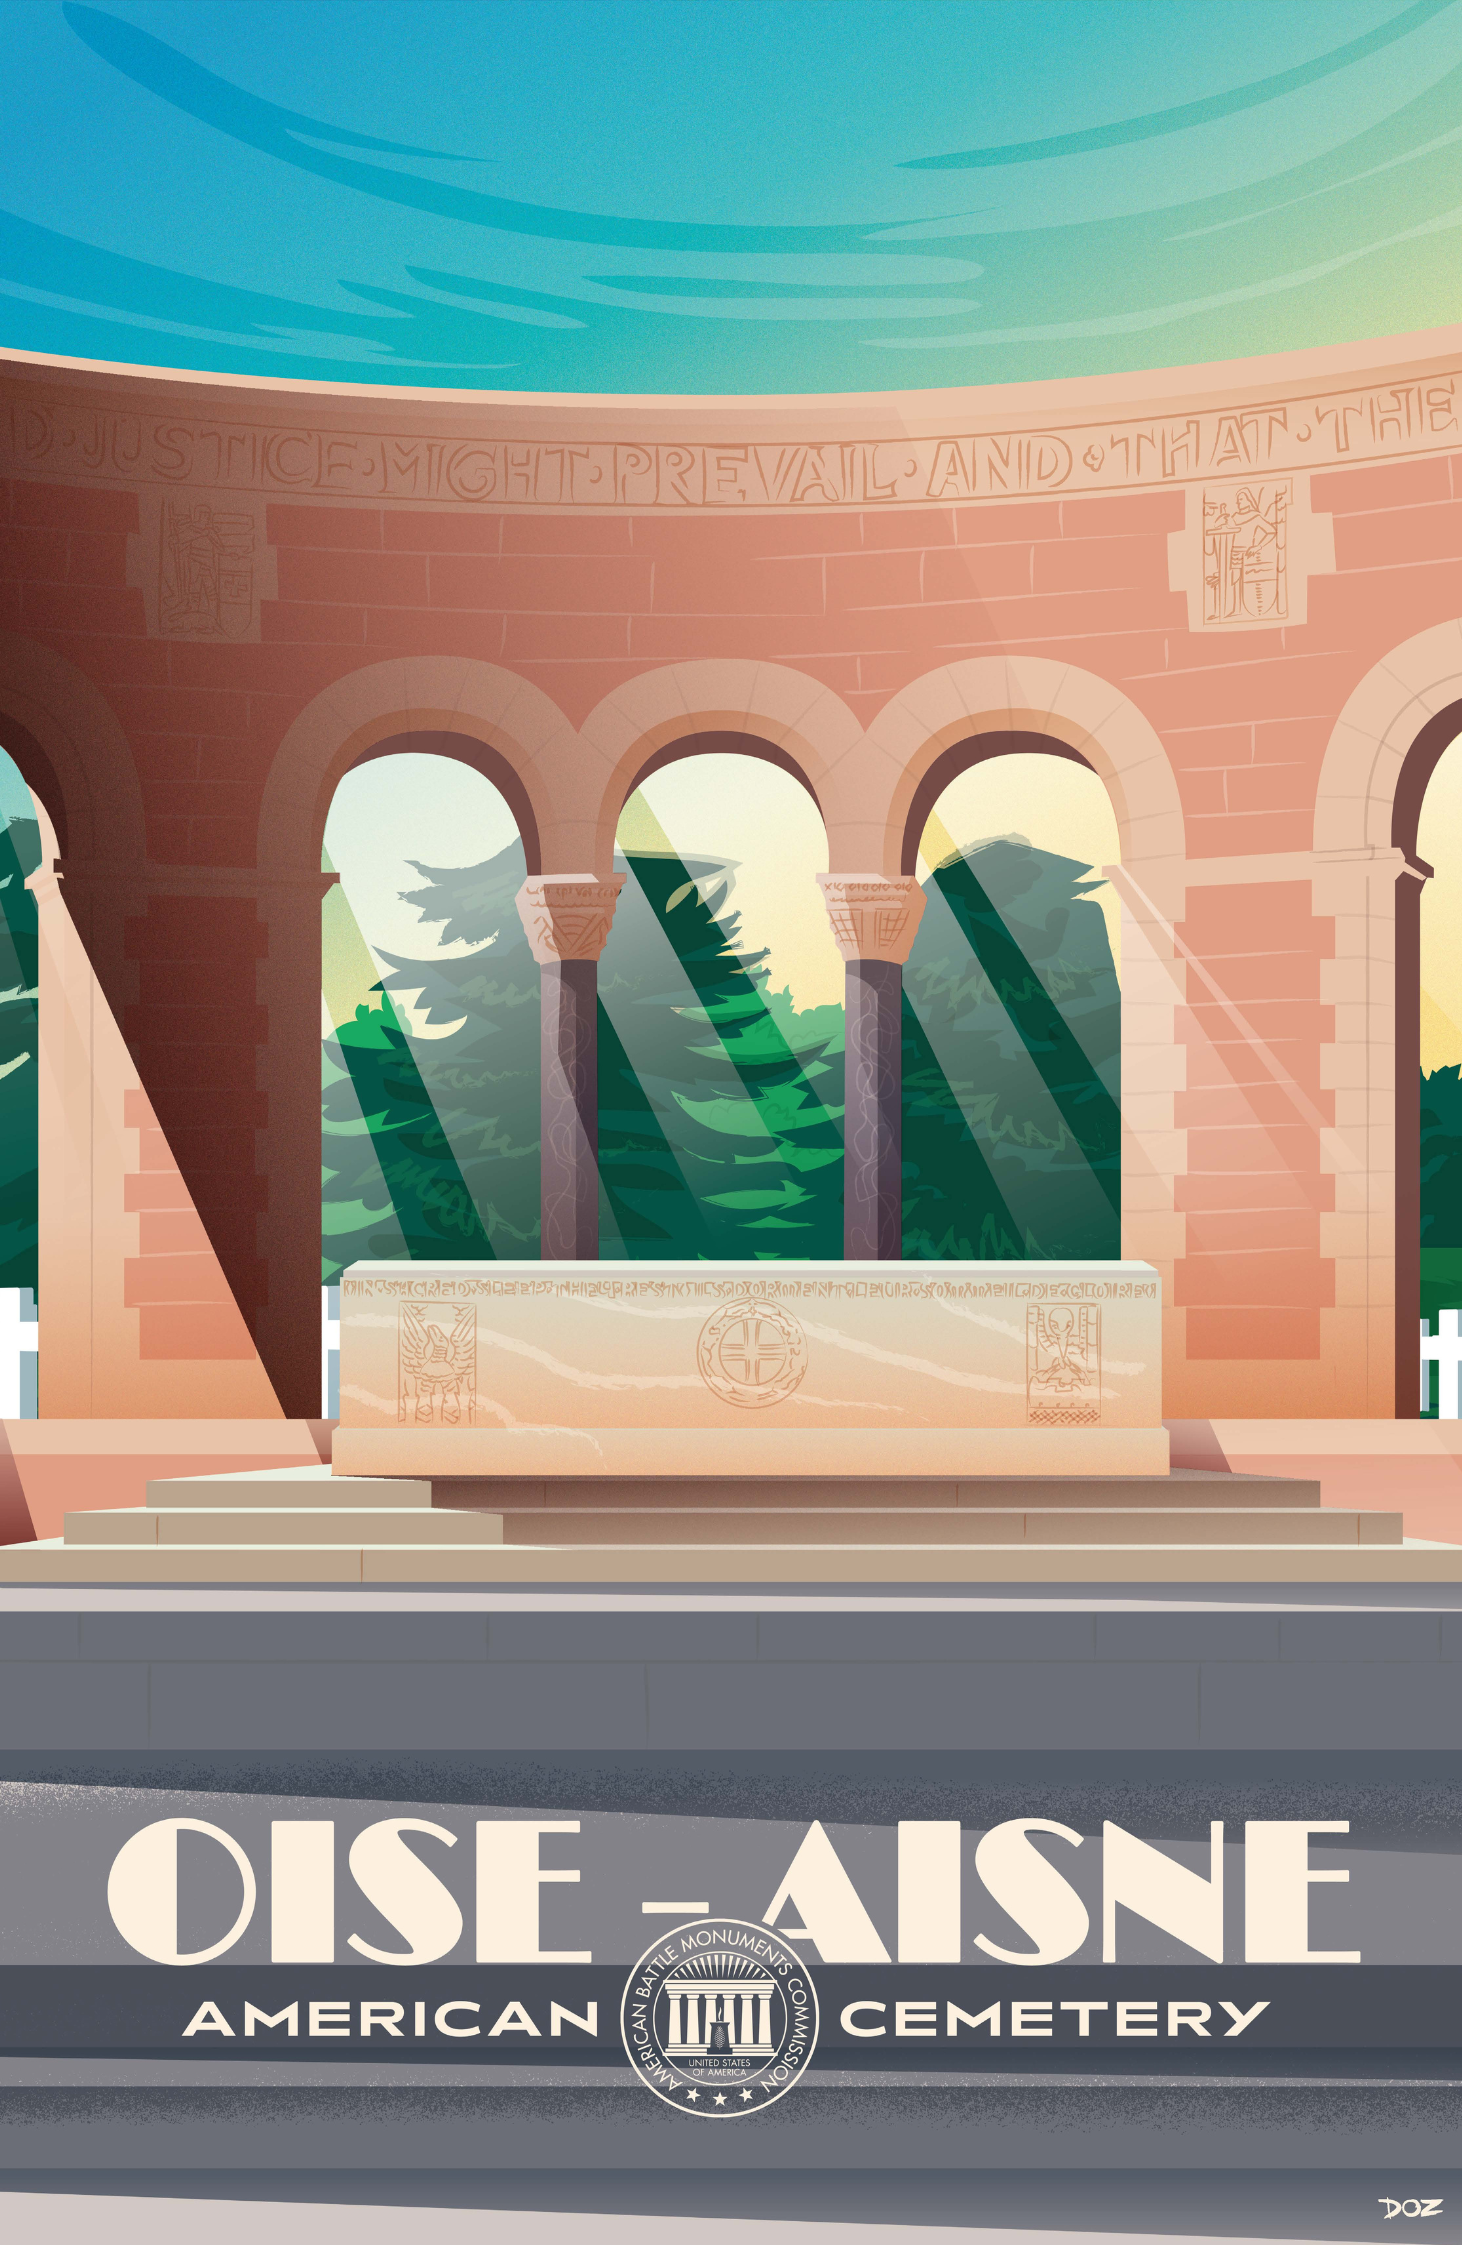 Vintage poster of Oise-Aisne American Cemetery